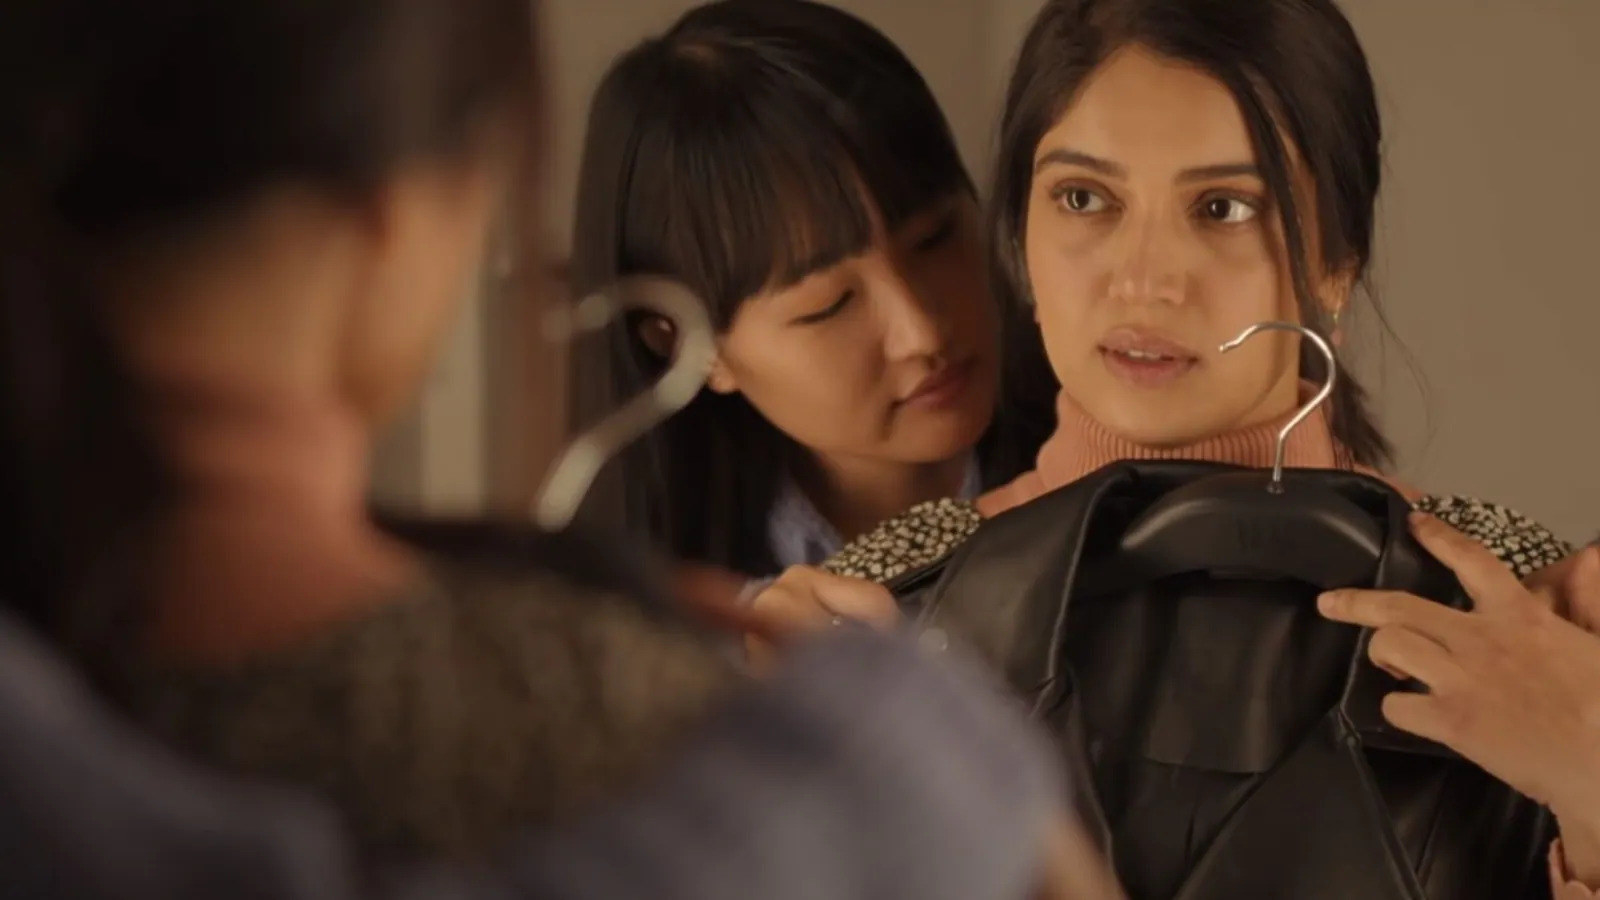 Sumi (Bhumi Pednekar) holding a leather jacket and looking in the mirror with Rimjhim (Chum Darang) behind her